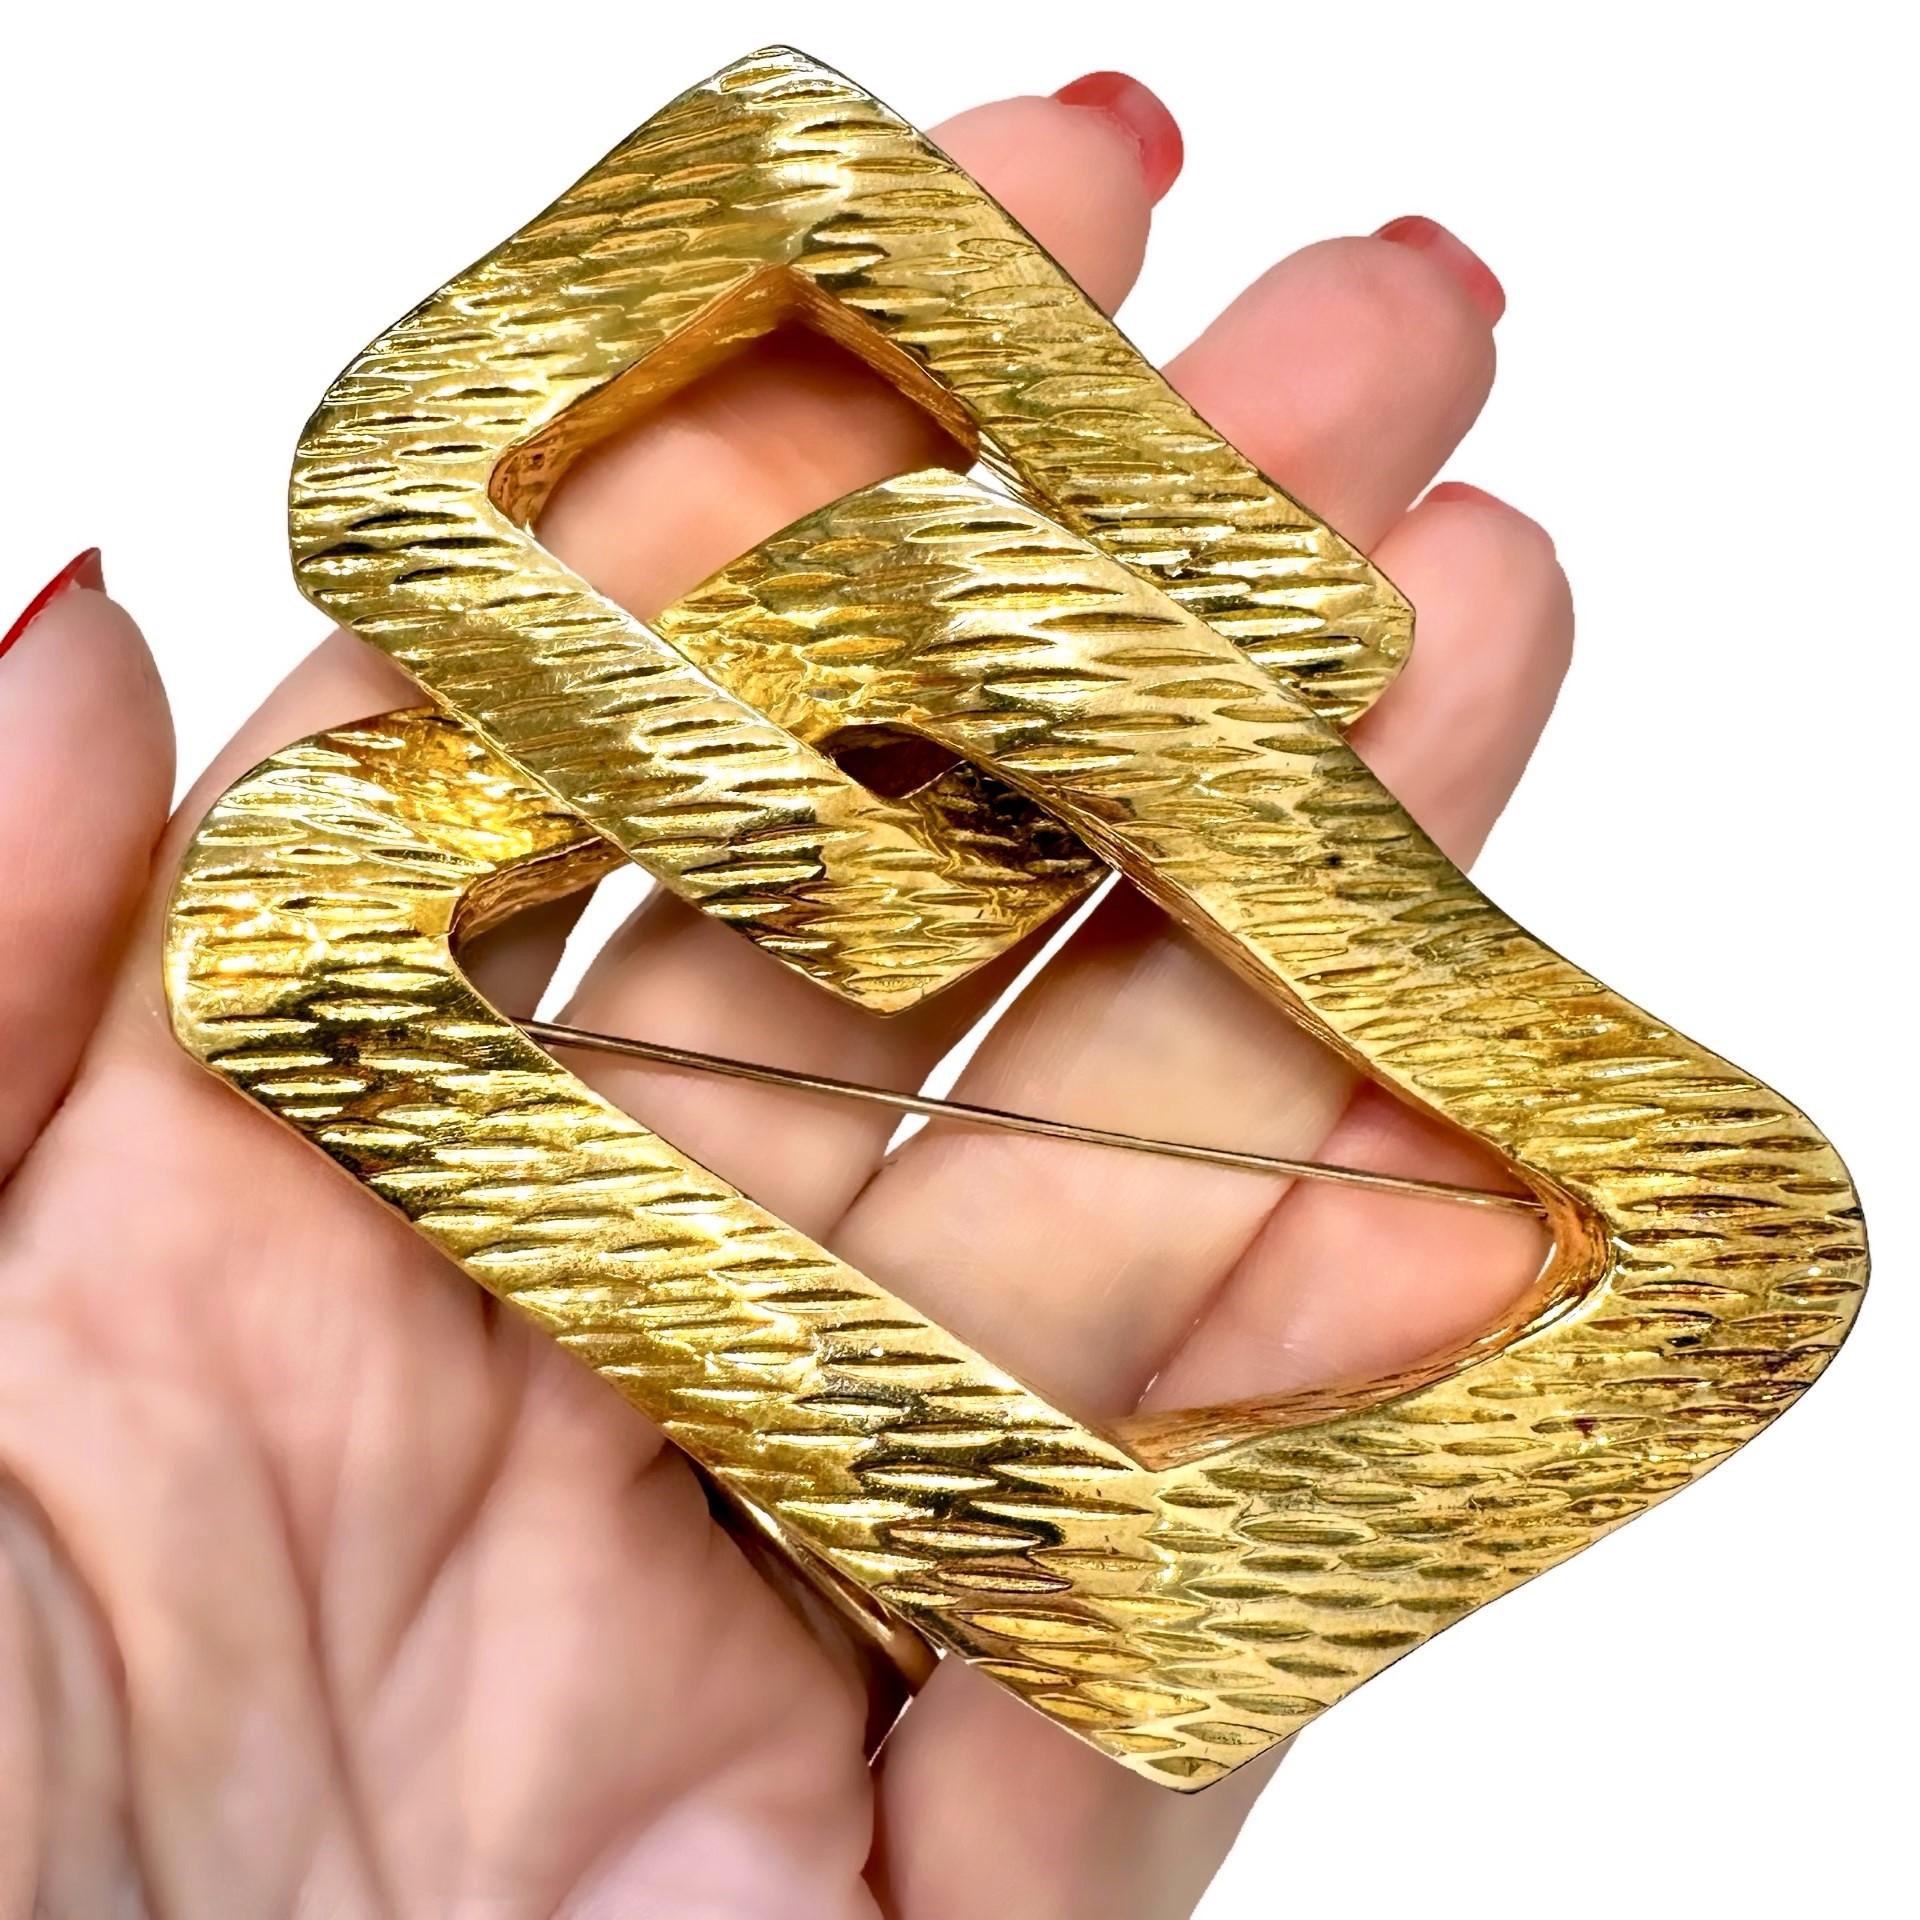 1960s-1970s French Bark Finish Gold Pendant Brooch by Wander 3 1/2 Inches Long  For Sale 5